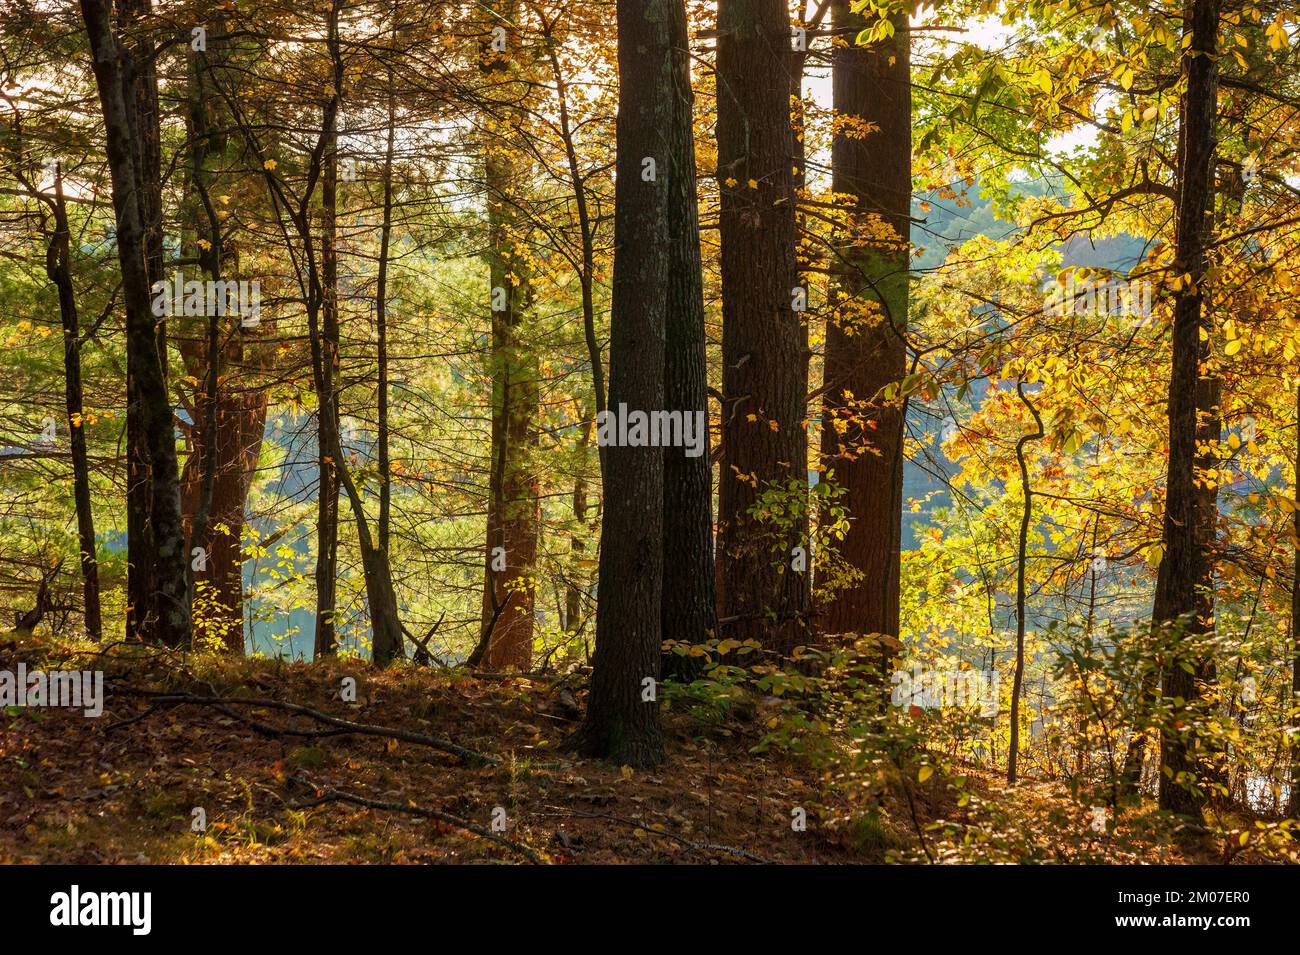 A mixed New England forest in a glowing warm light of a setting sun. Foliage in peak fall colors. Assabet River National Wildlife Refuge, Sudbury, MA. Stock Photo